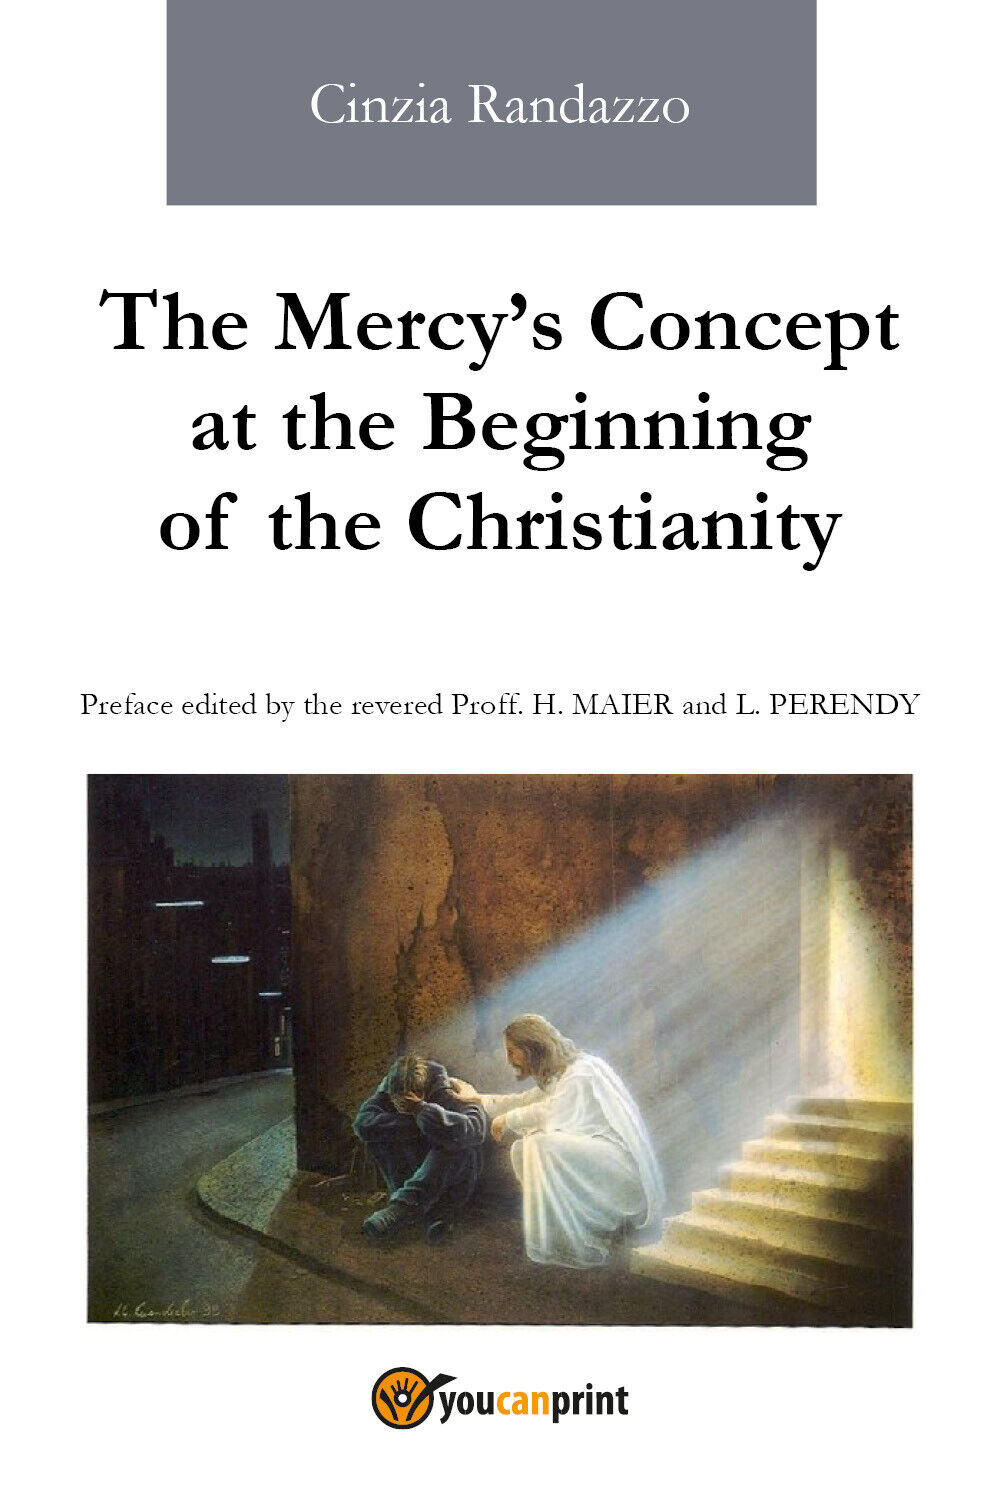 The Mercy?s Concept at the Beginning of the Christianity, Cinzia Randazzo, 2018 libro usato